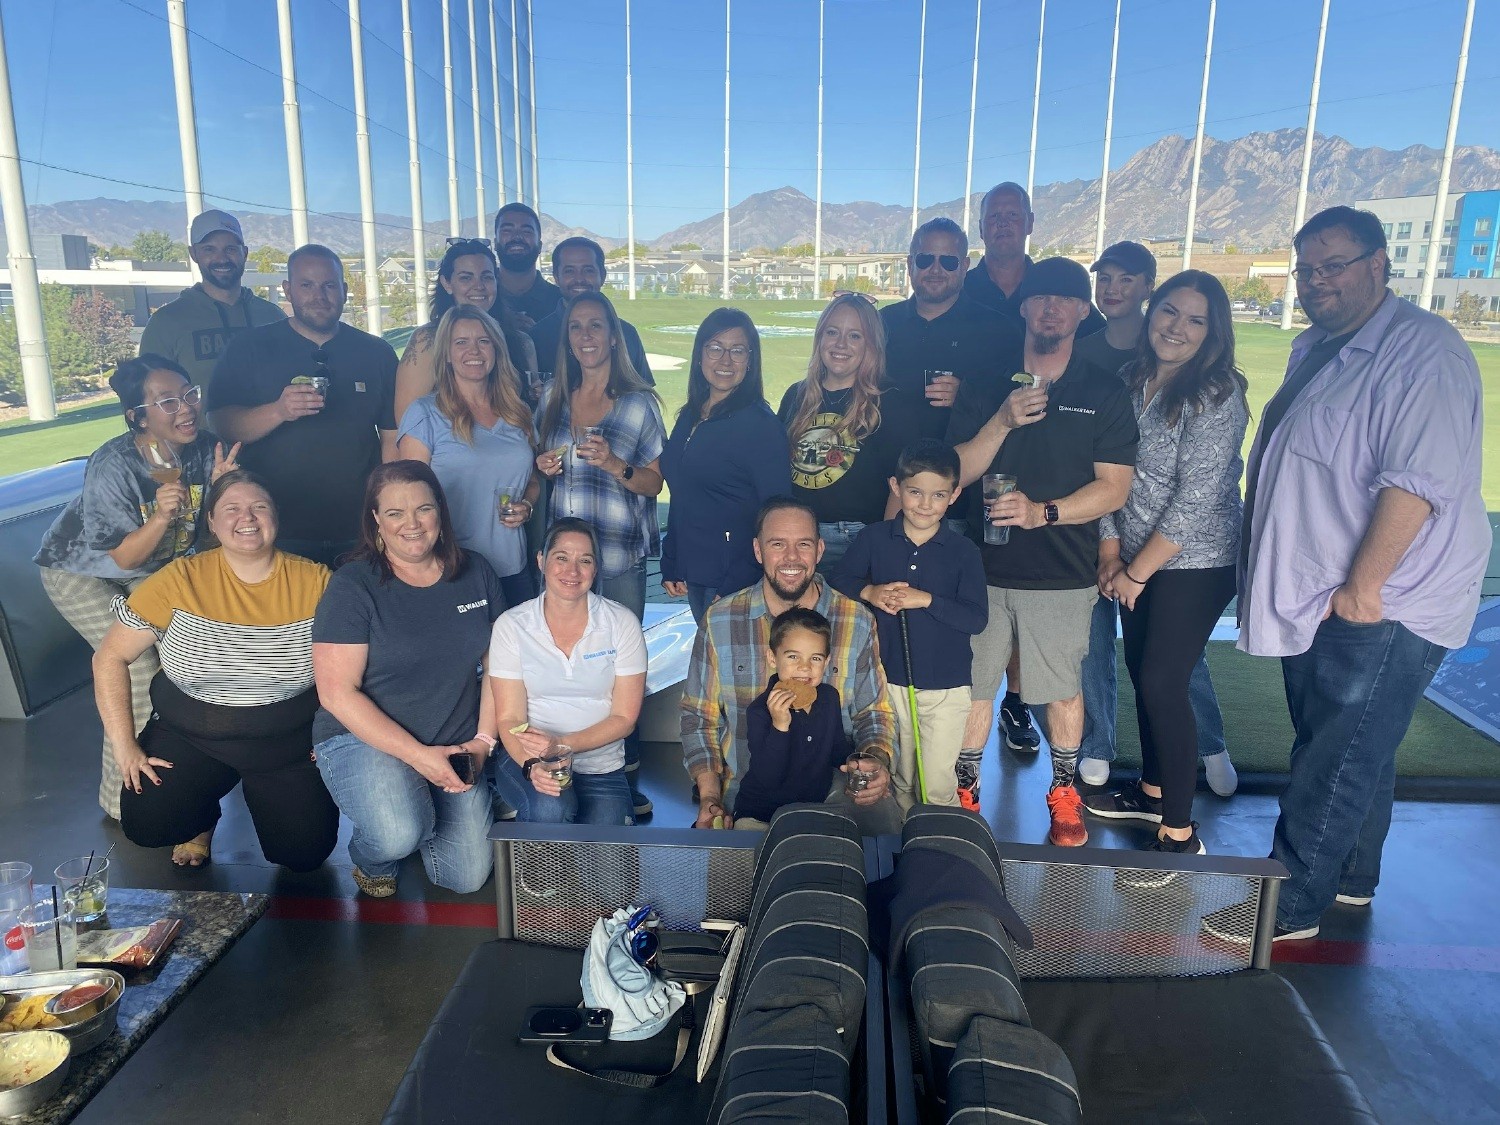 Walker Tape Co.'s leadership team building activity at Top Golf.